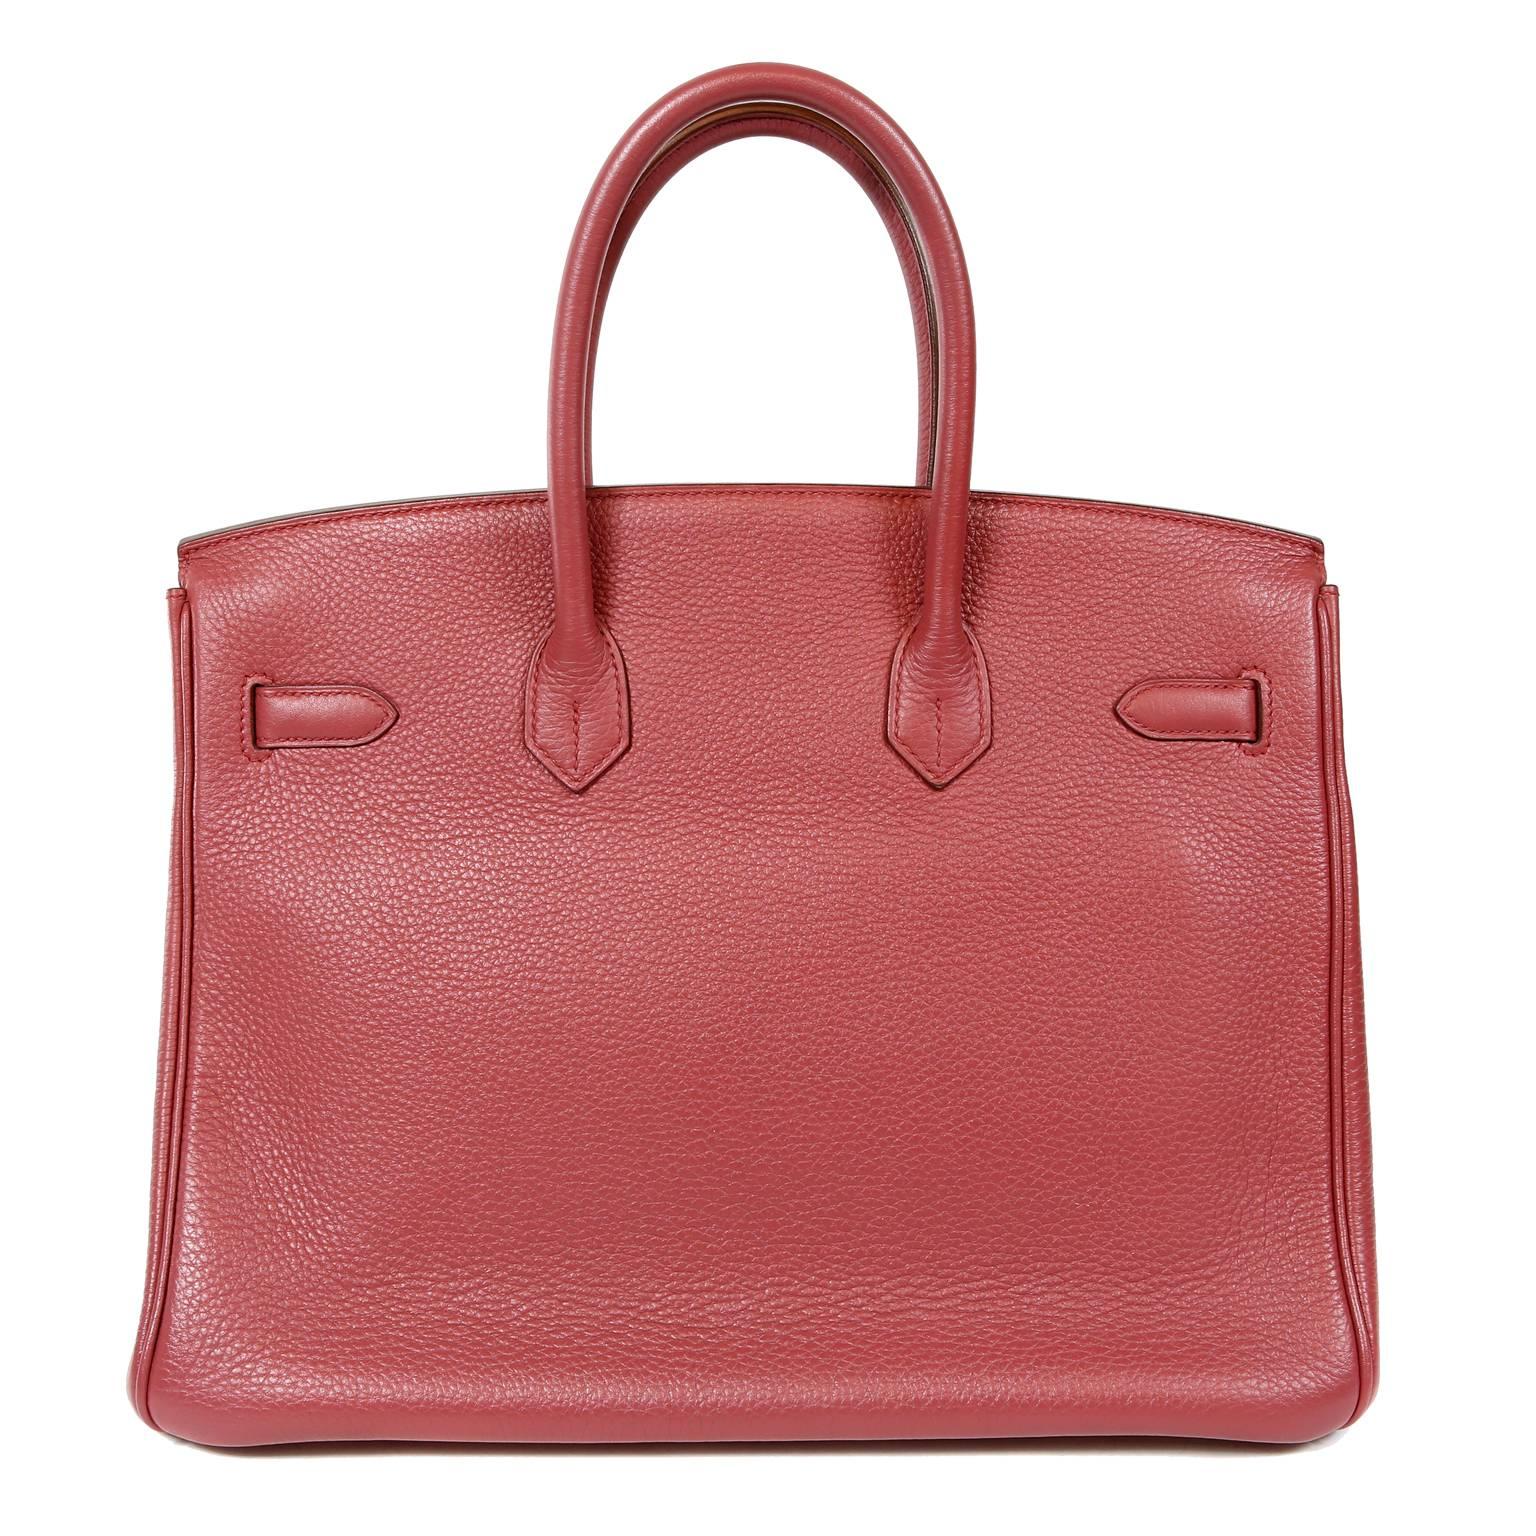 Hermès Bois de Rose Togo Leather 35 cm Birkin-  excellent  condition with the protective plastic intact on the hardware. 
Hand created, Hermès bags are highly sought after and can be nearly impossible to get.  Bois de Rose is a subdued shade of